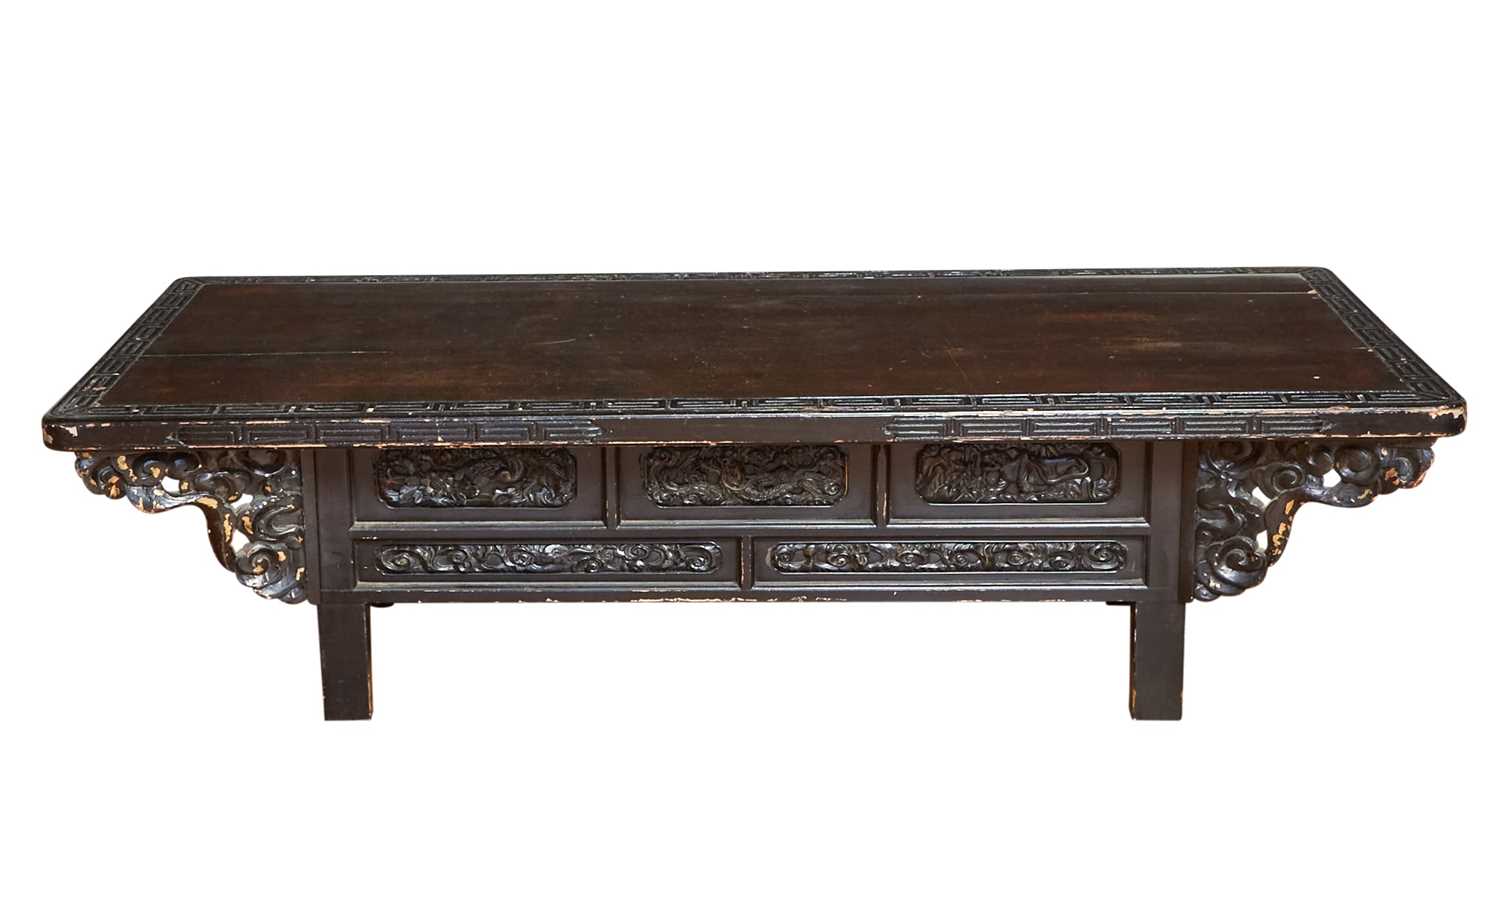 Lot 195 - Chinese Stained and Lacquer Low Table